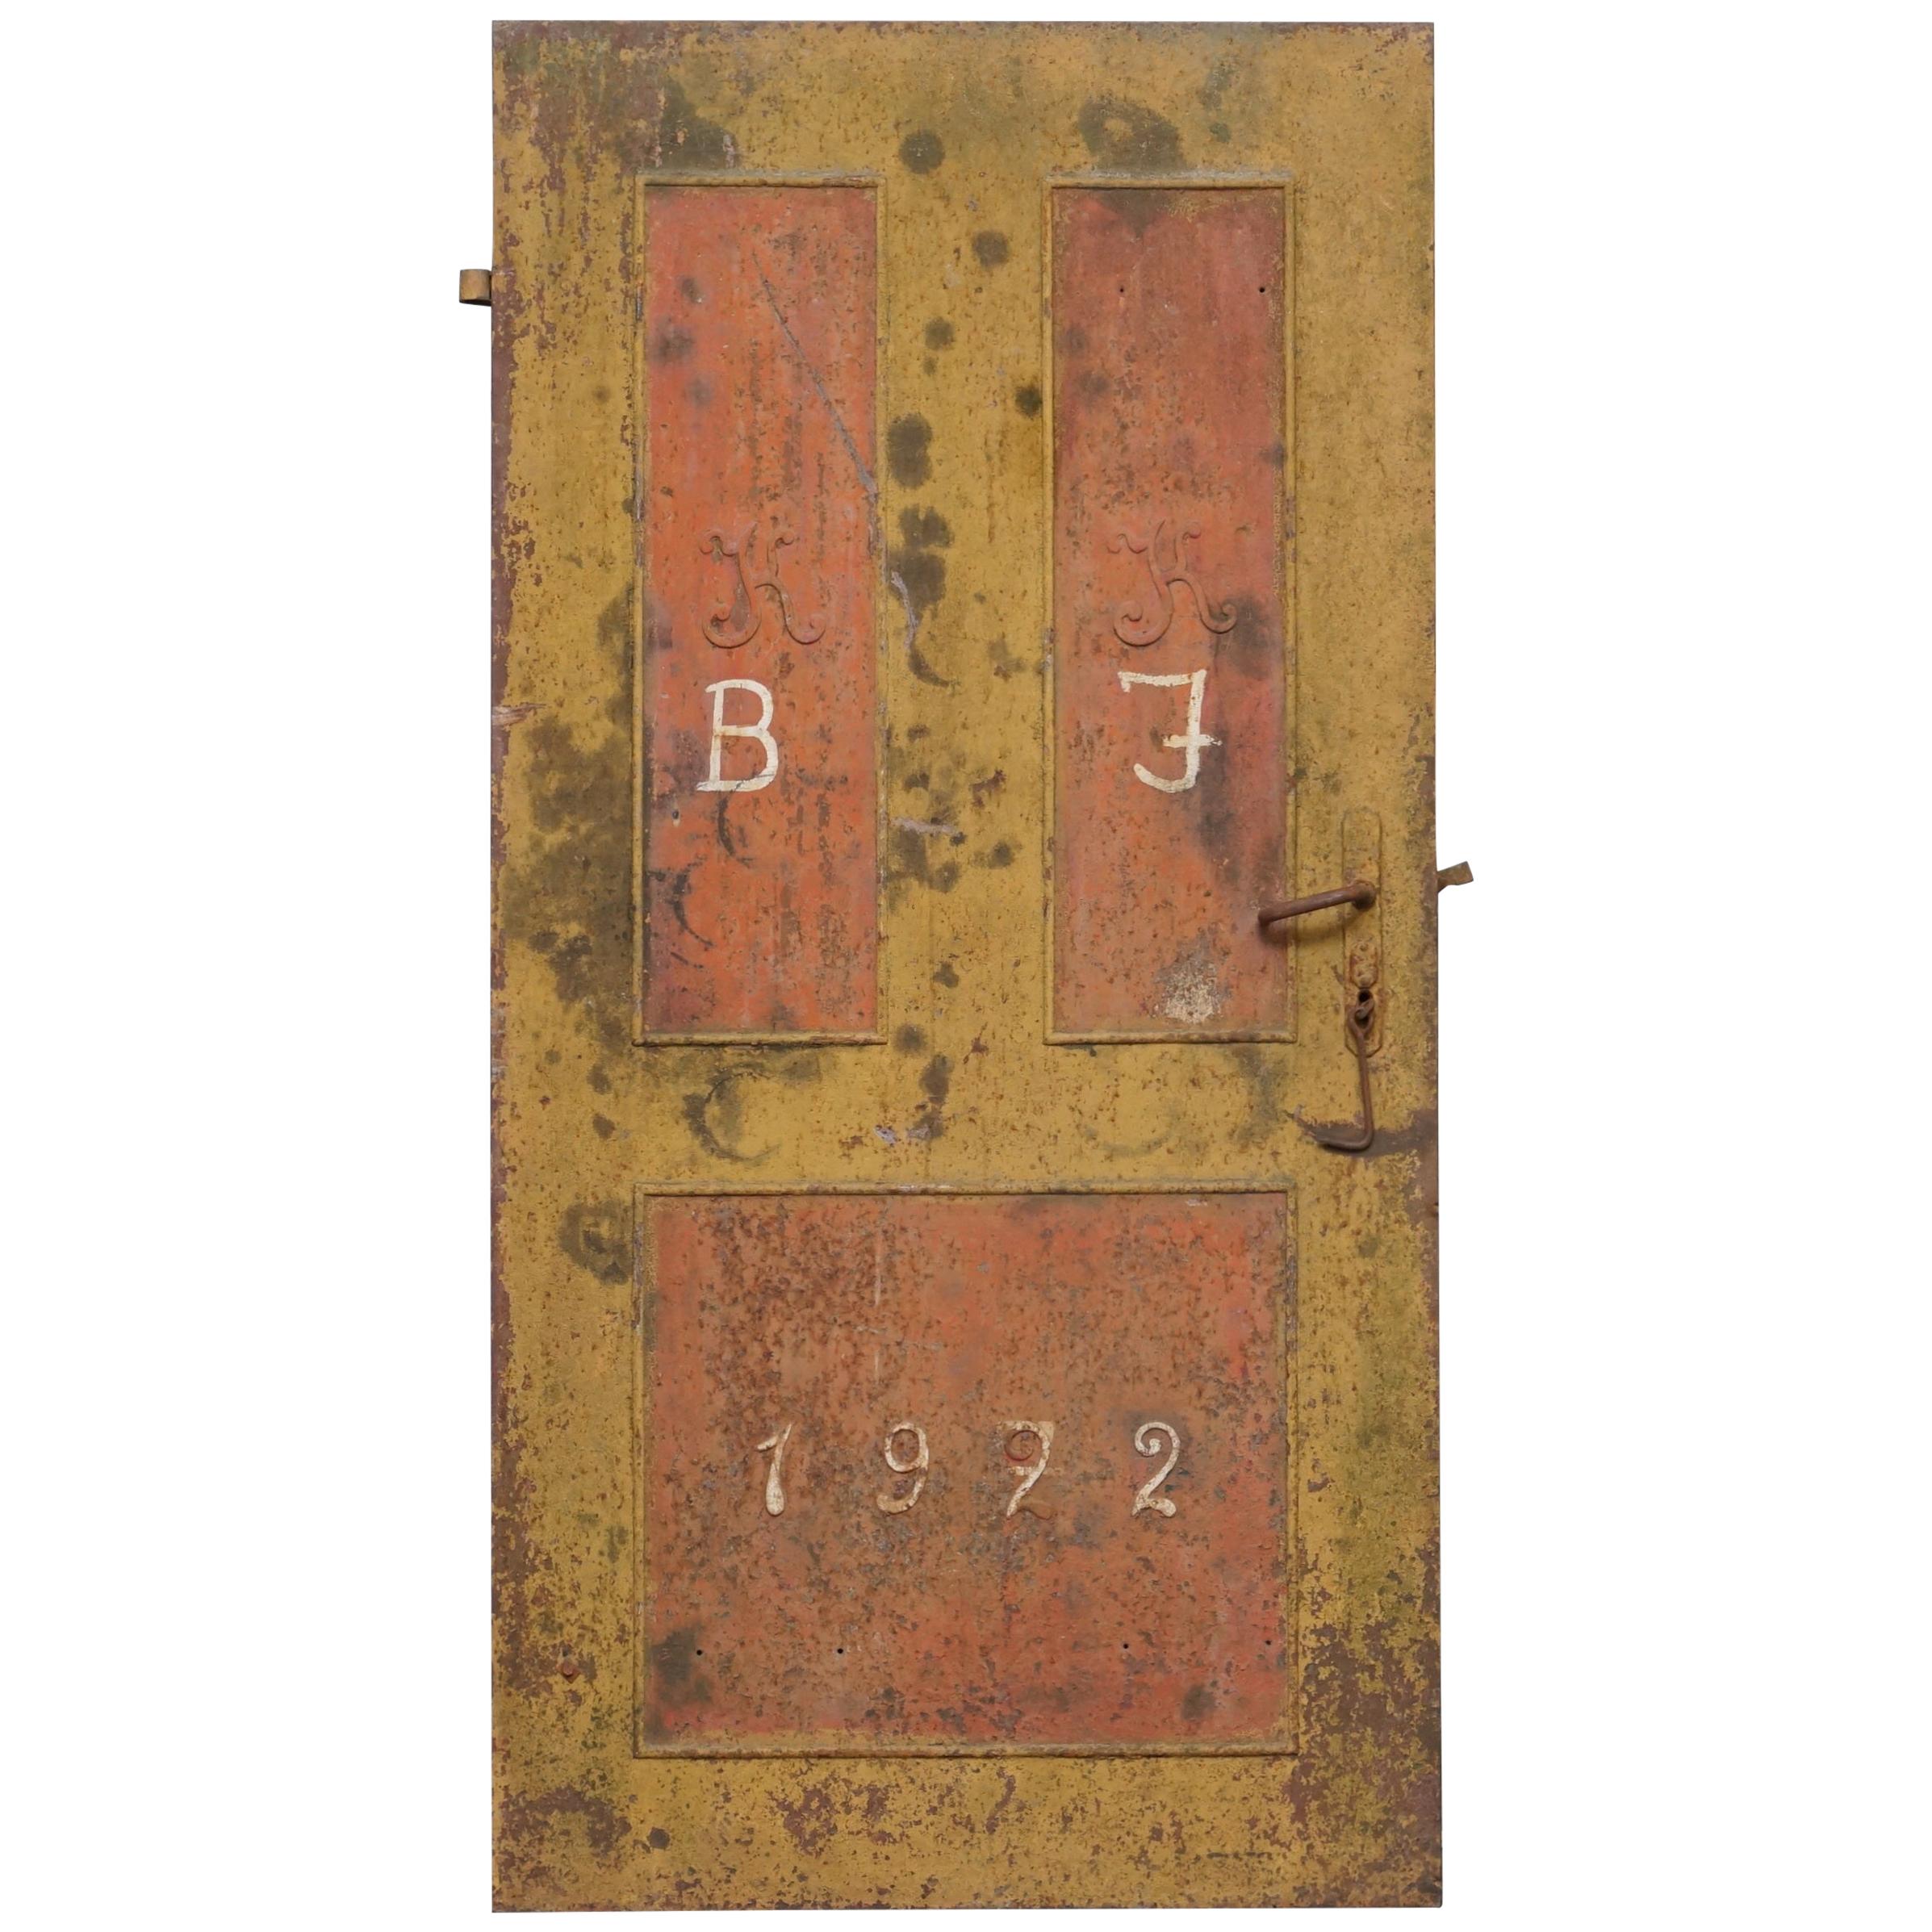 Rare 1922 Hand Painted Hungarian Hand Painted Security Anti Looting Door Hungry For Sale